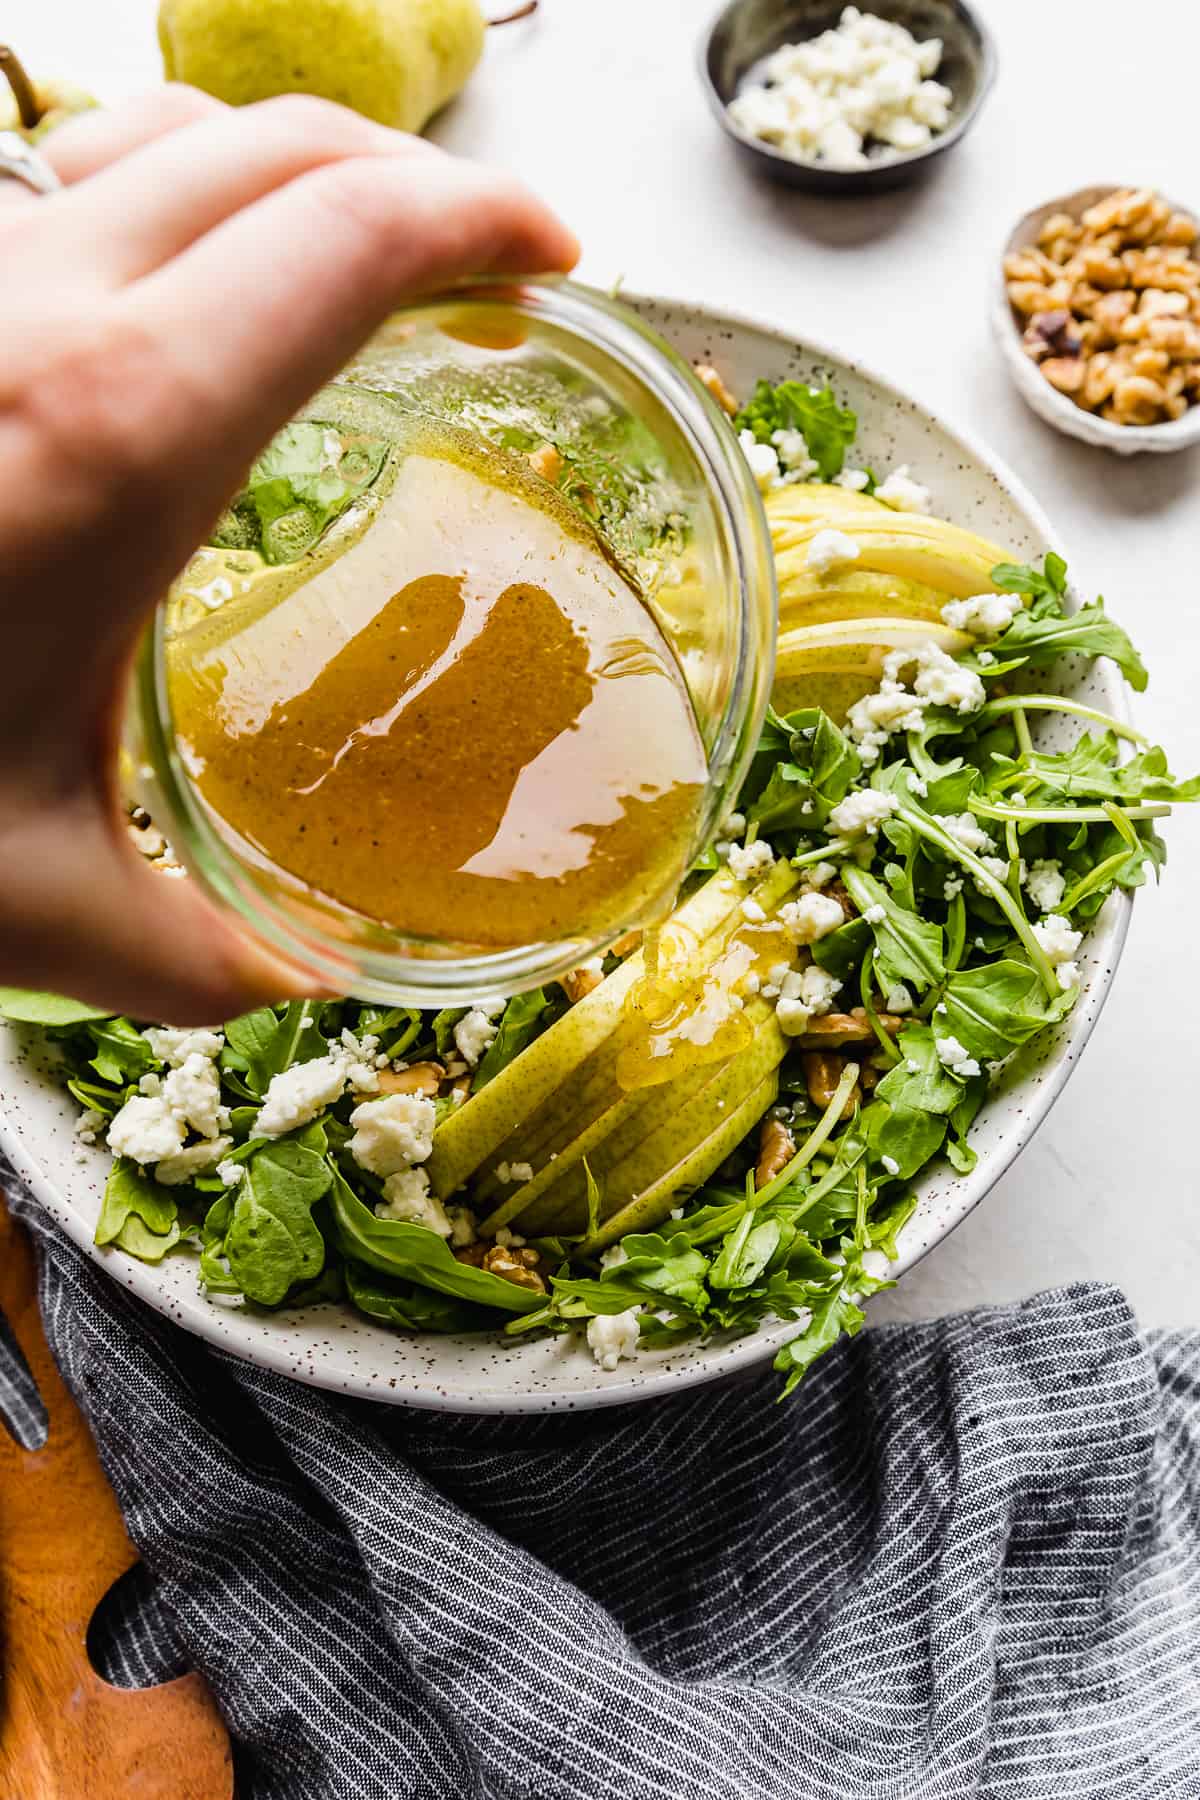 Salad dressing being poured over a Rocket and Pear Salad in a large bowl.